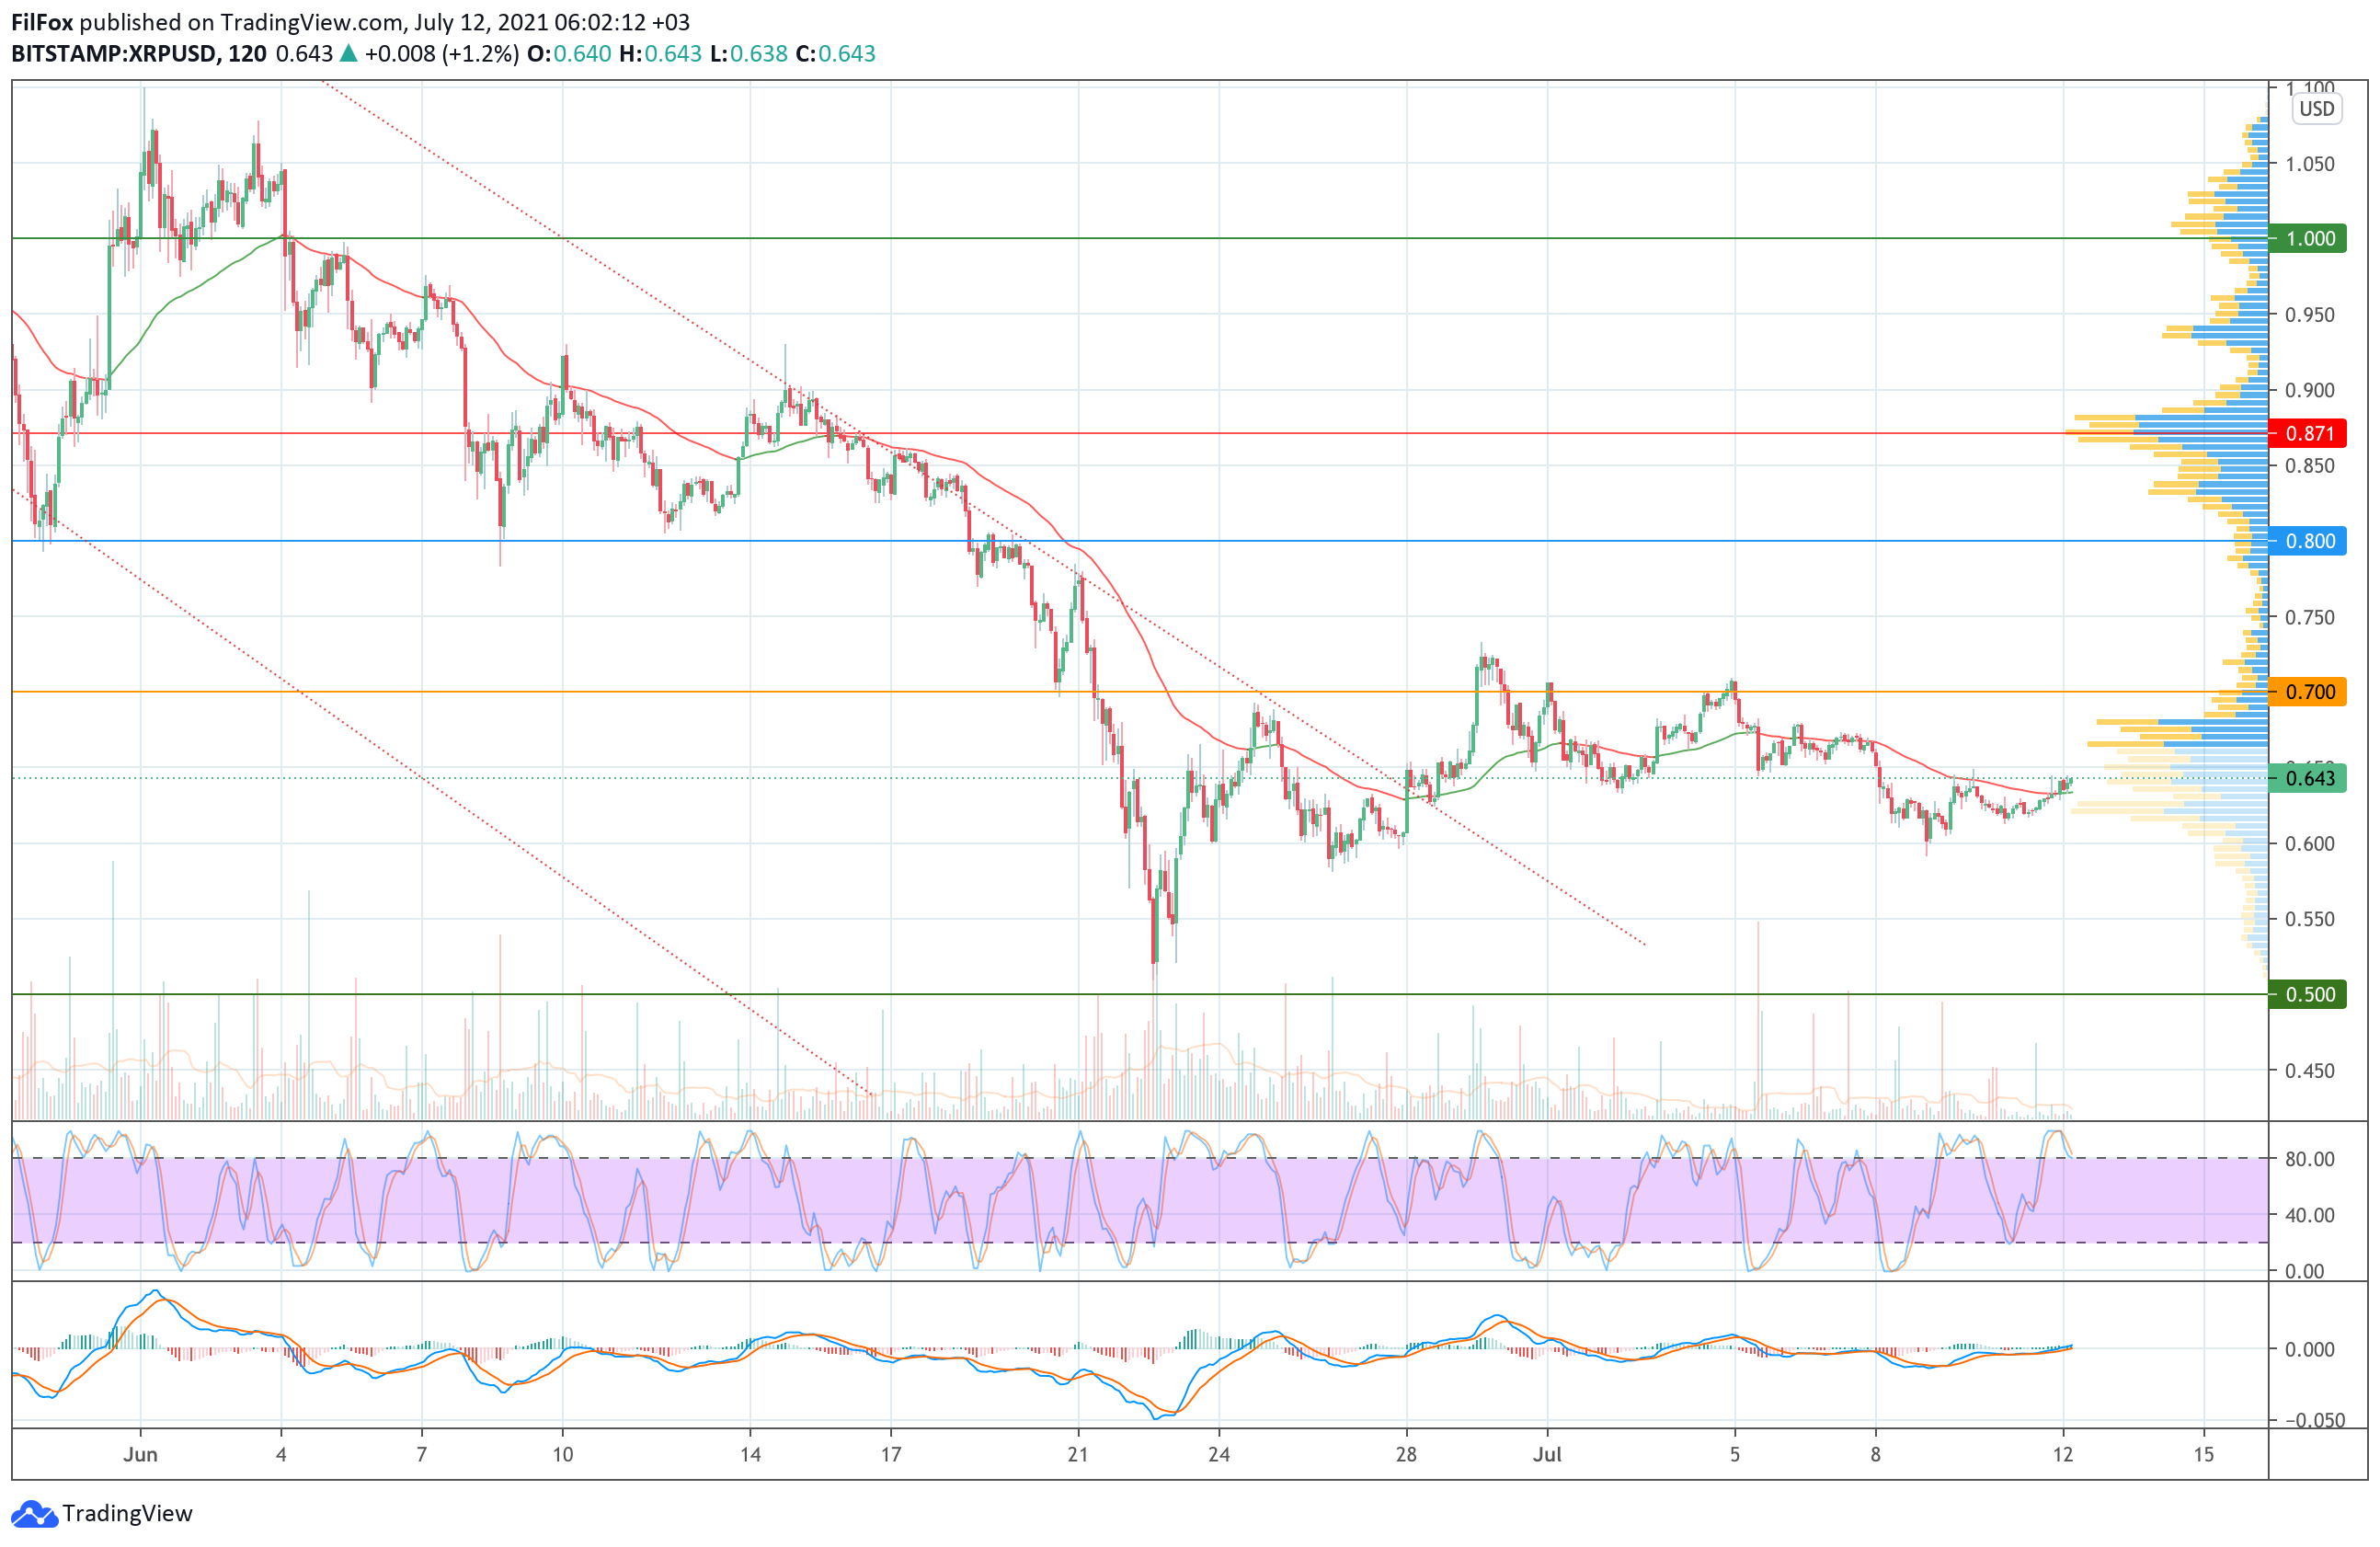 Analysis of the prices of Bitcoin, Ethereum, XRP for 07/12/2021